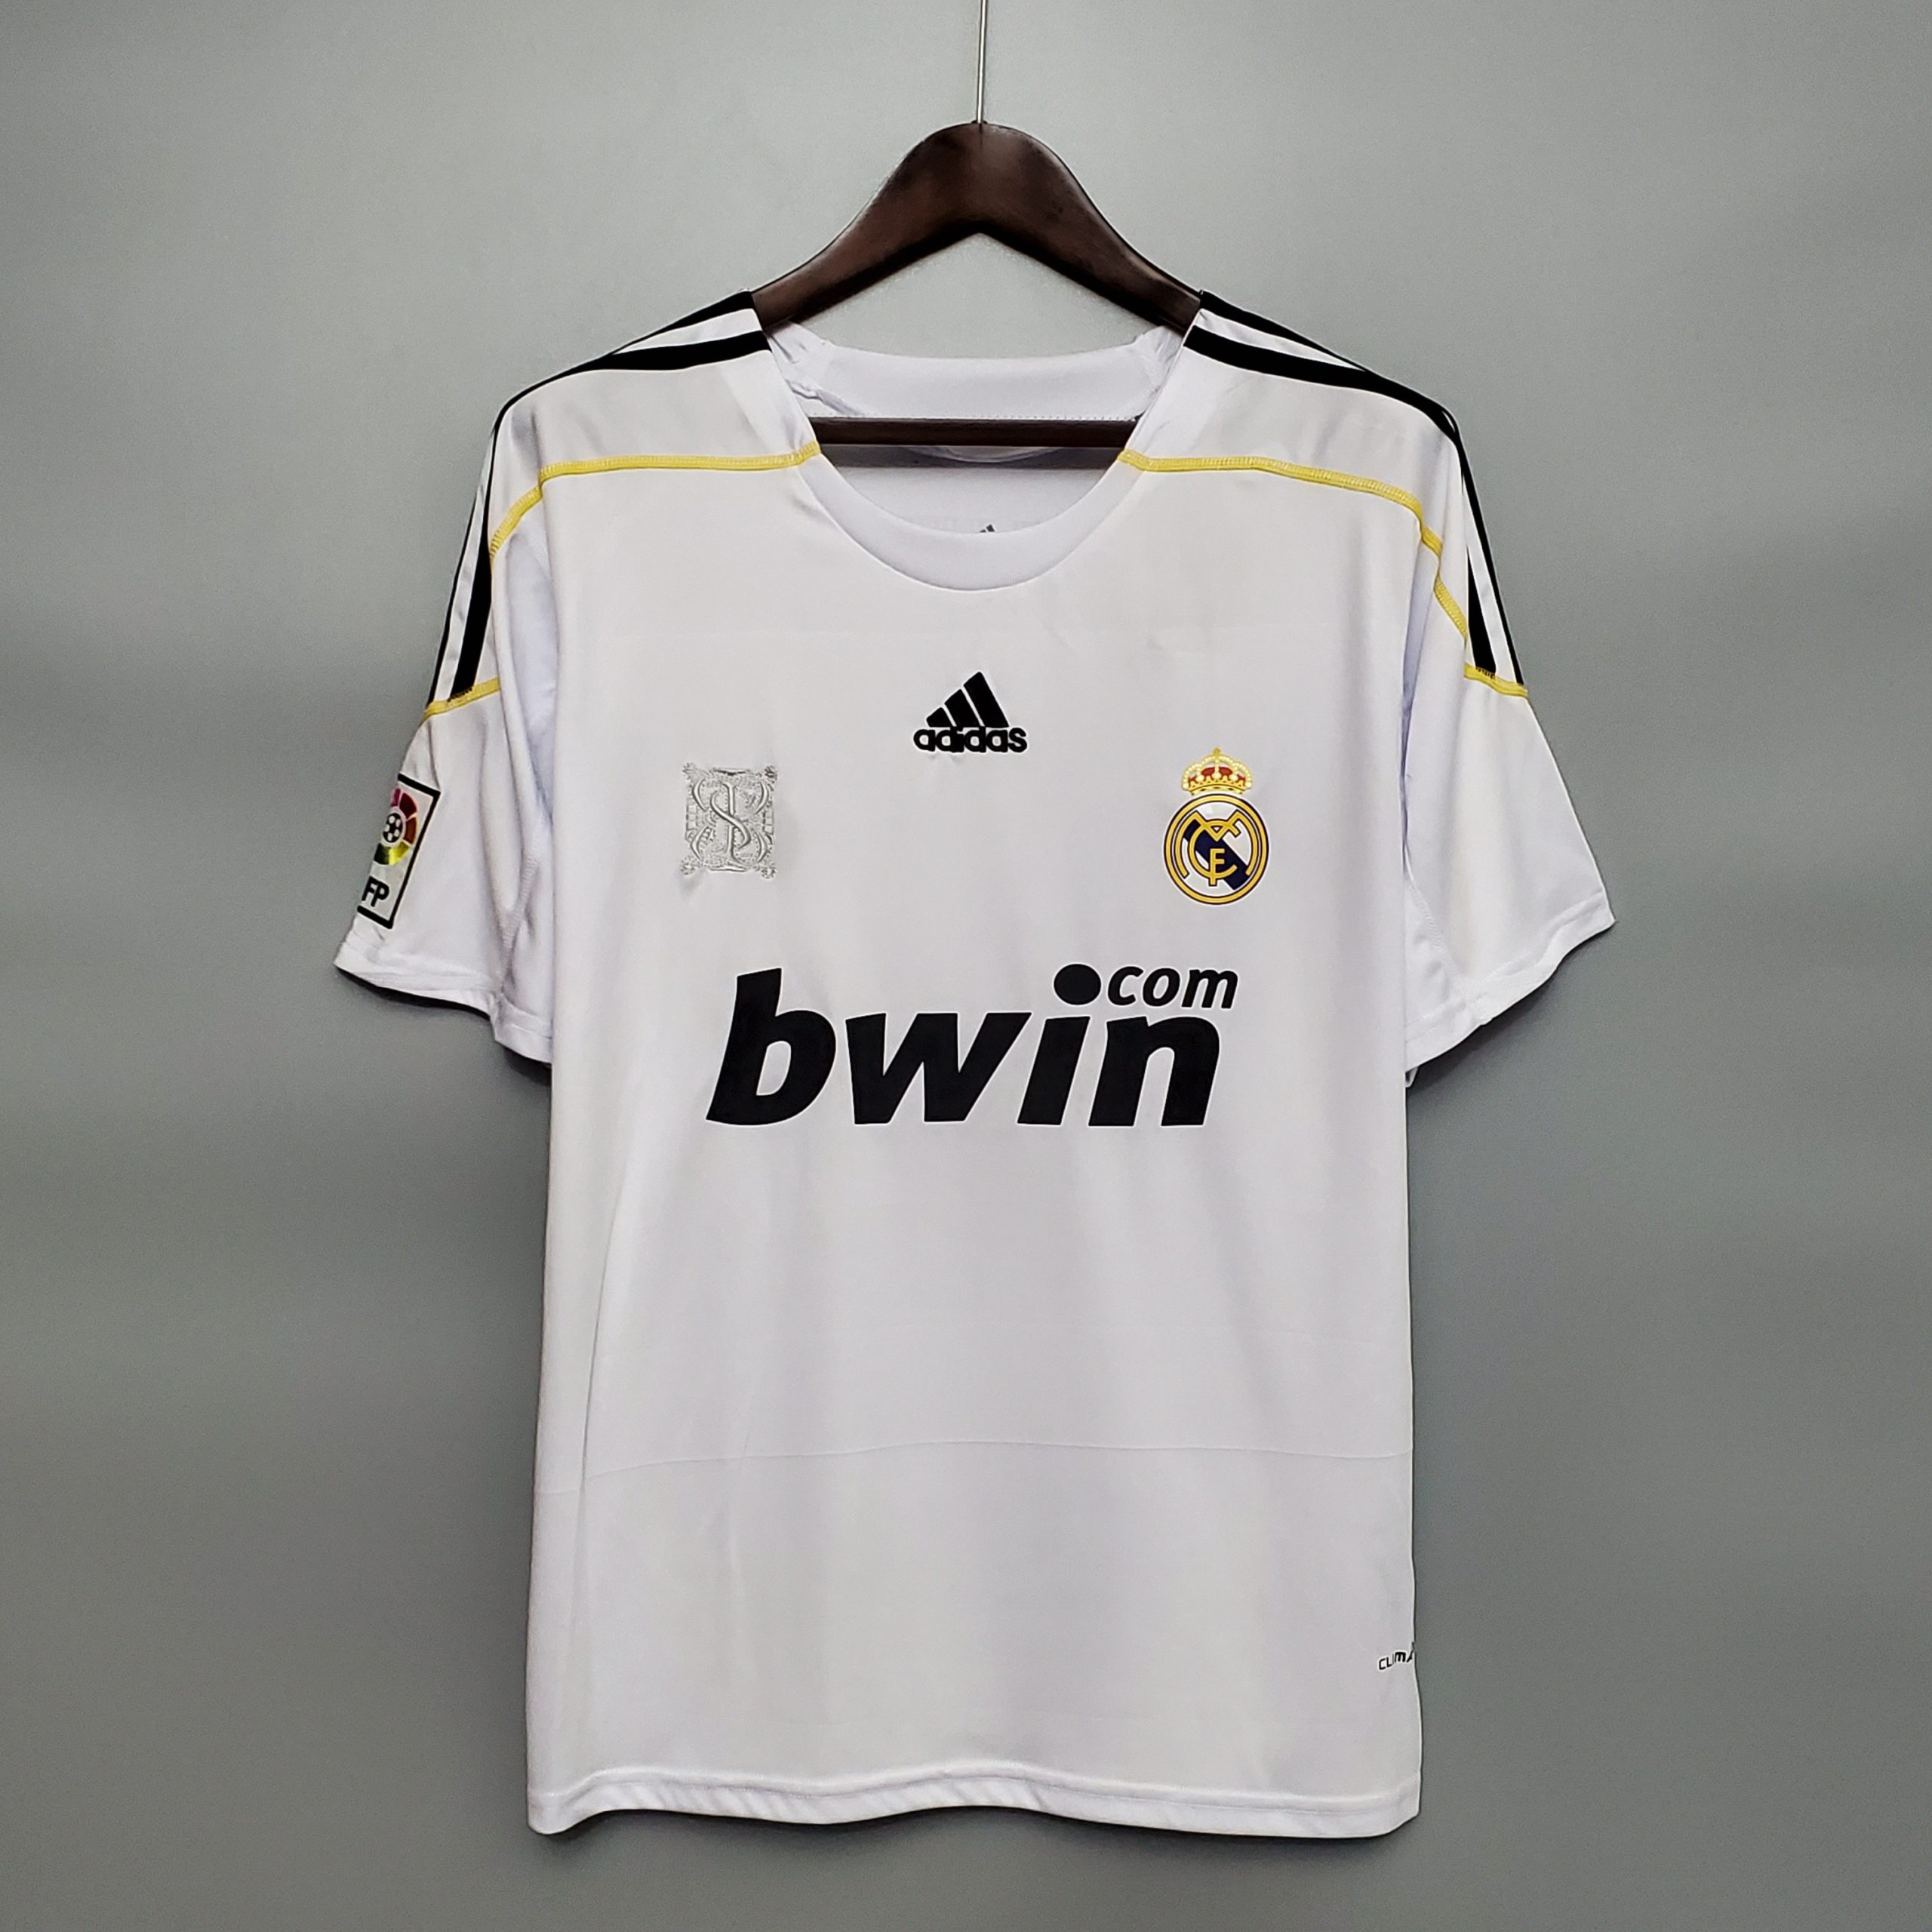 Real Madrid 2009-10 Home Retro Jersey: A Cultural and Historical Icon